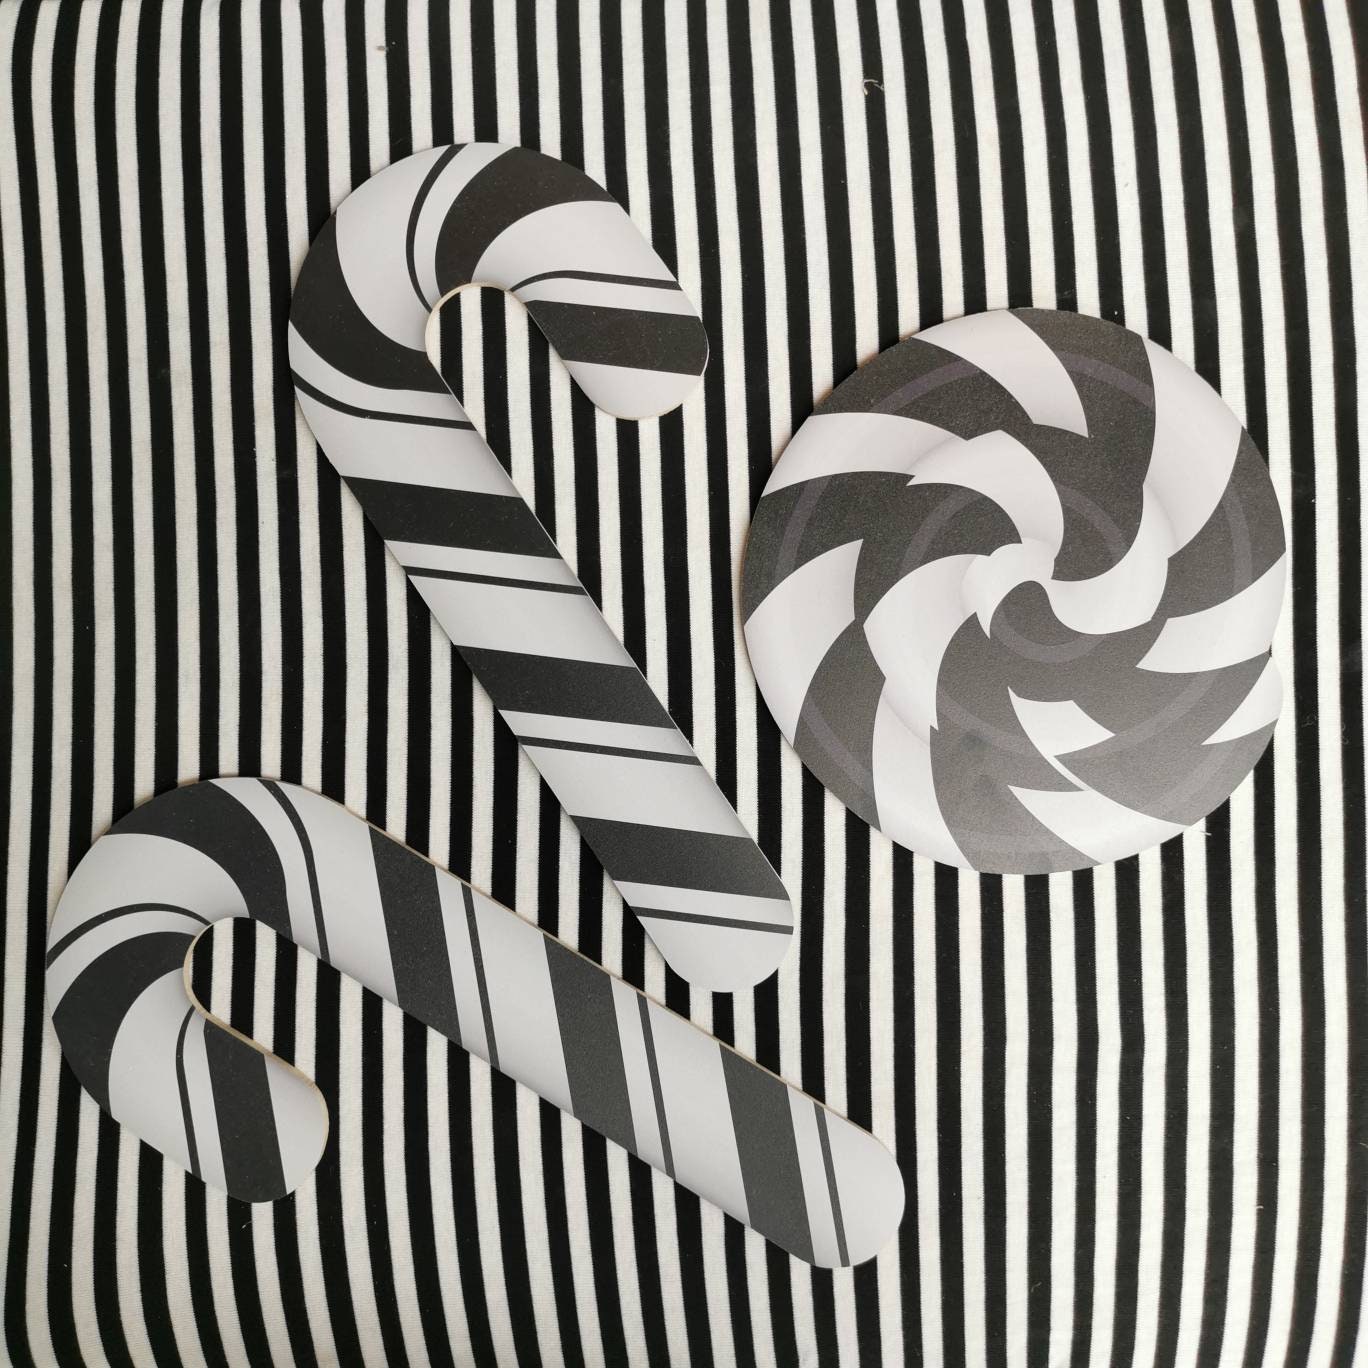 Black & White Candy Cane Prop